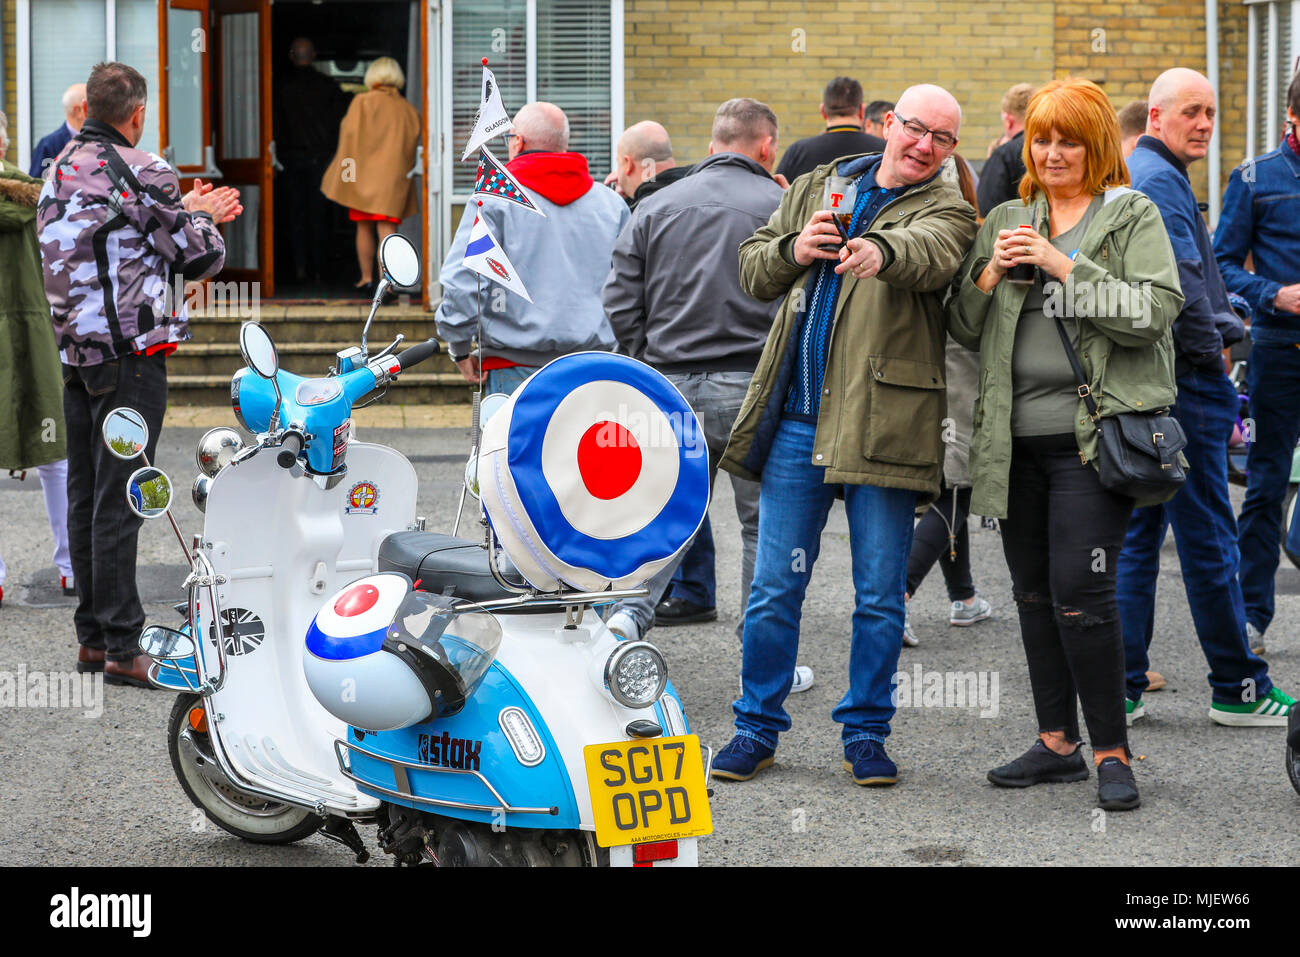 Troon, Ayrshire, UK. 5th May, 2018. Over 100 scooters, riders and passengers attended the annual Scottish Mod Rally in Troon, one of the largest Mod meetings in Scotland with scooters coming from all across the country. Before the final customary 'Ride out' through the town, there were competitions and prizes for the best vintage, best presented and furthest travelled scooters when the owners take pride in presenting their scooters and themselves in best order. Credit: Findlay/Alamy Live News Stock Photo